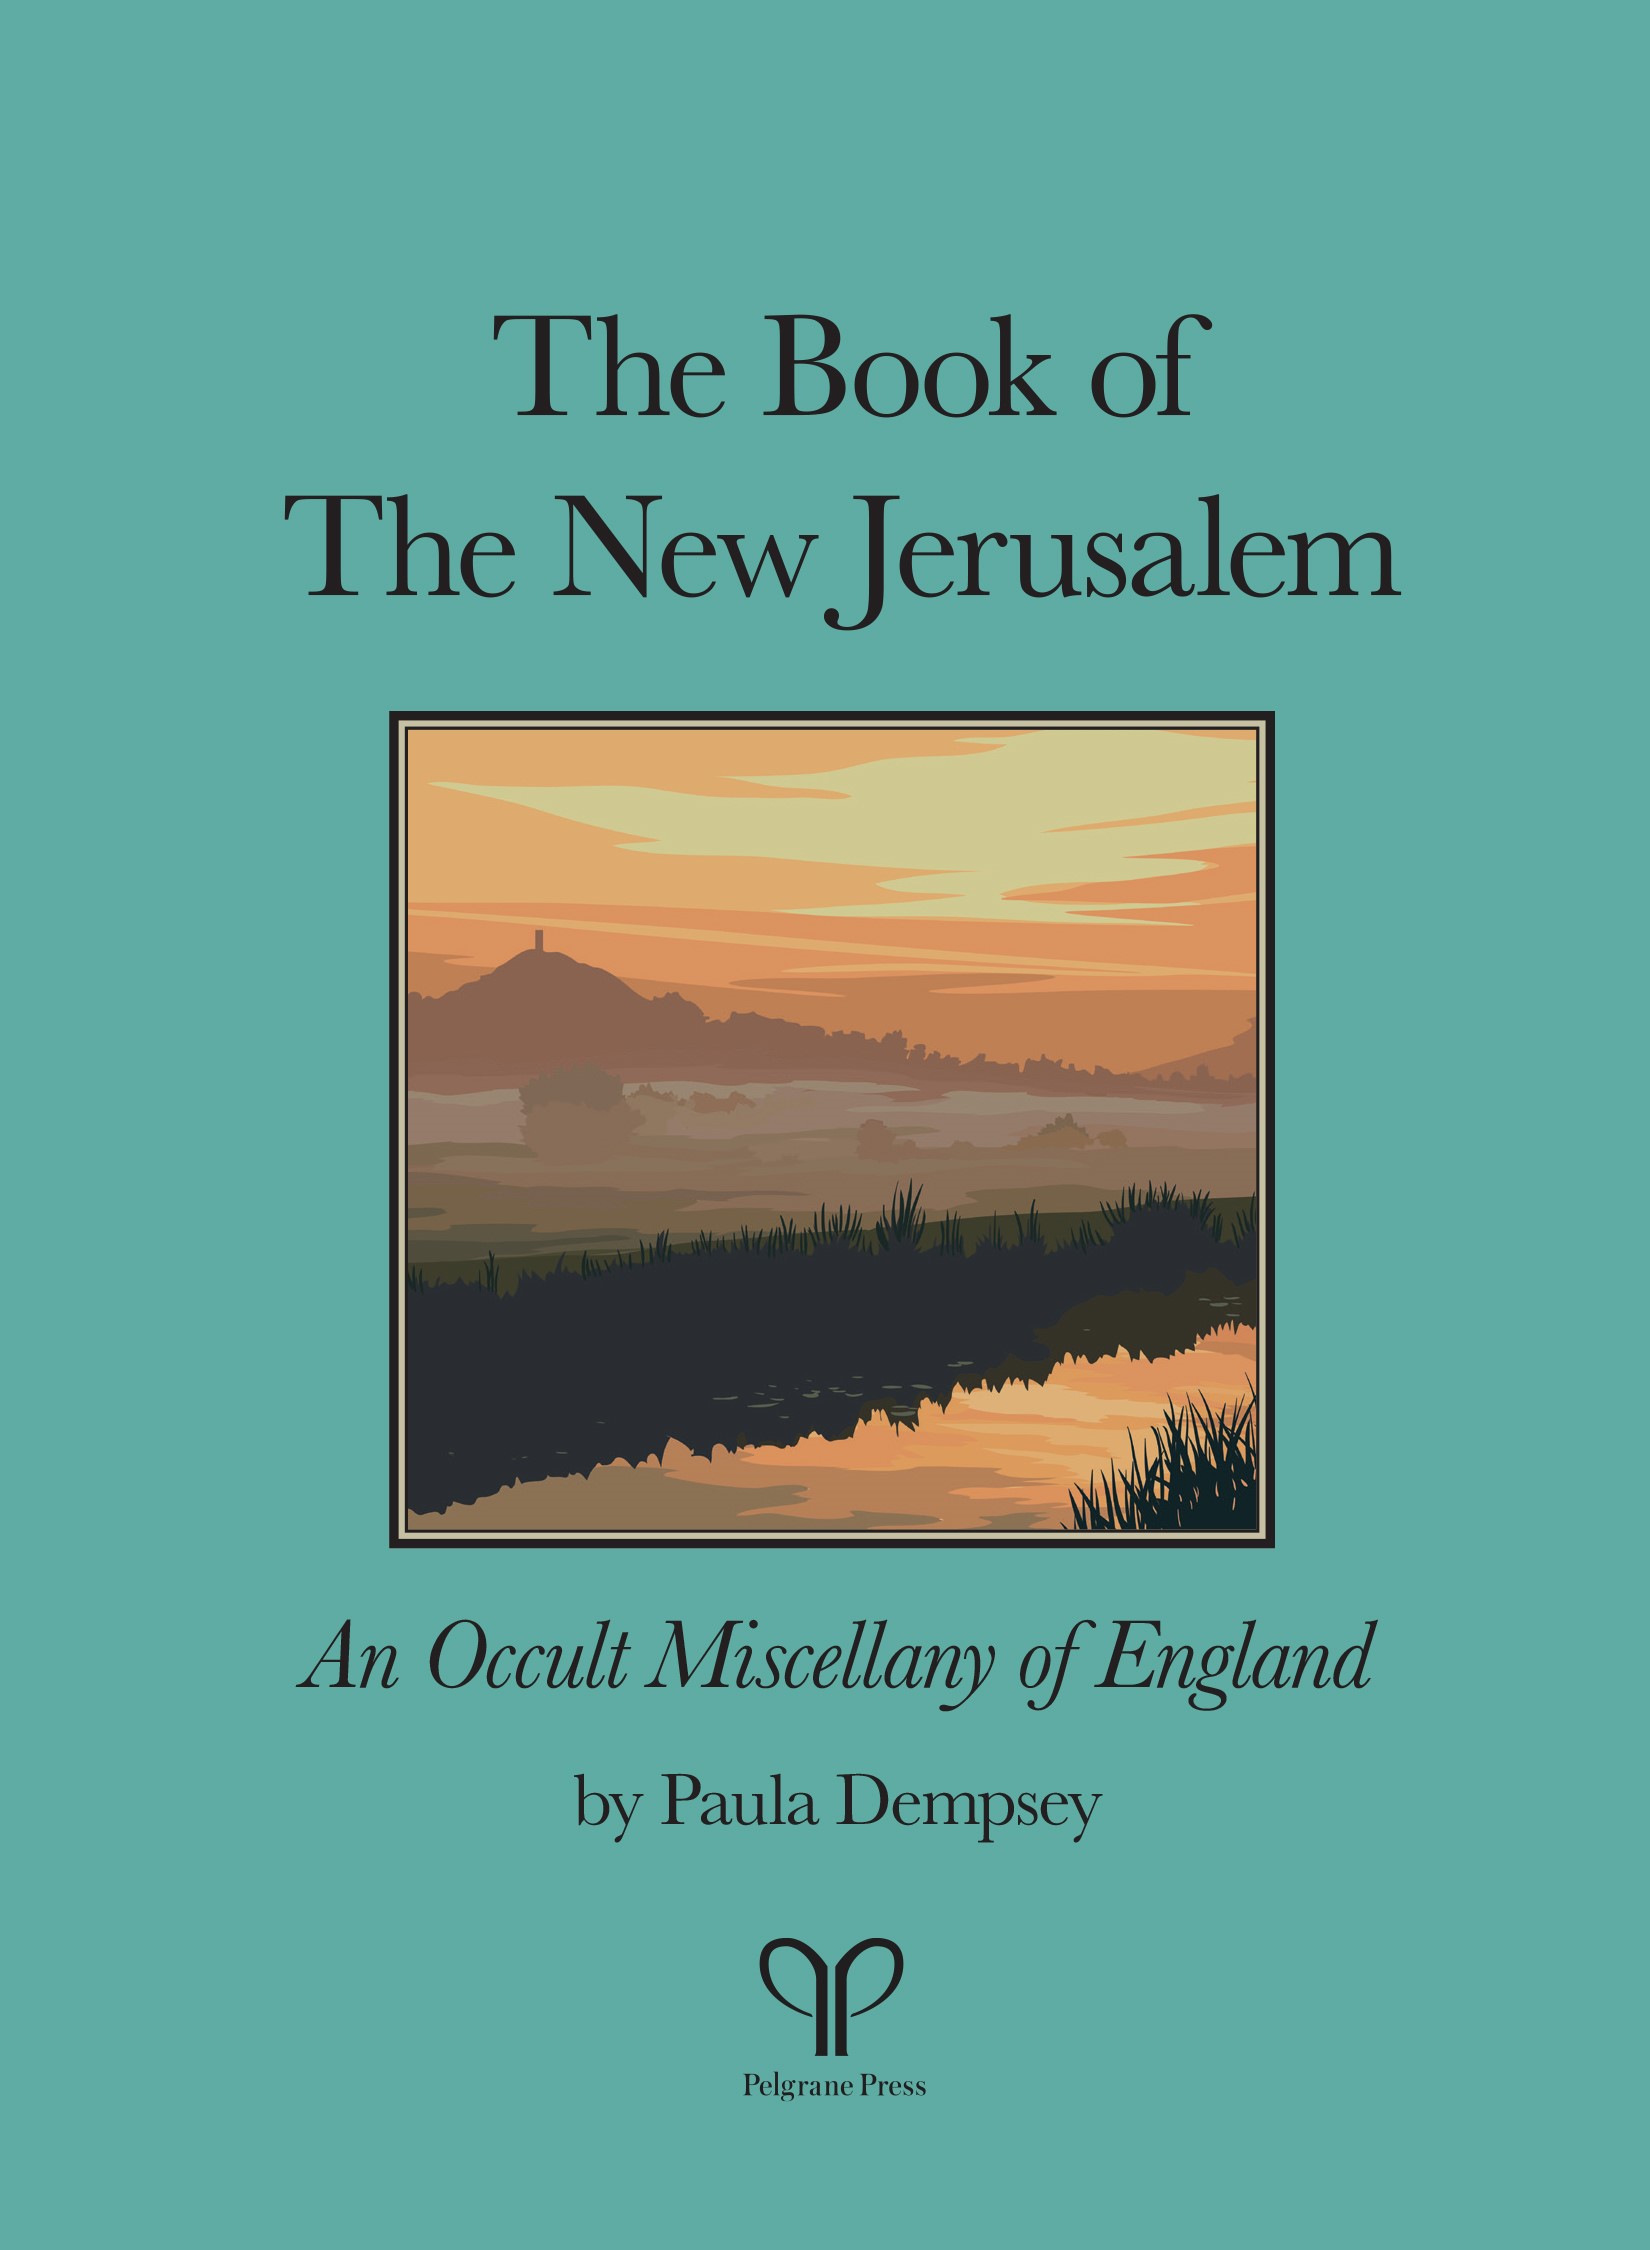  The Book Of The New Jerusalem:  An Occult Miscellany of England 